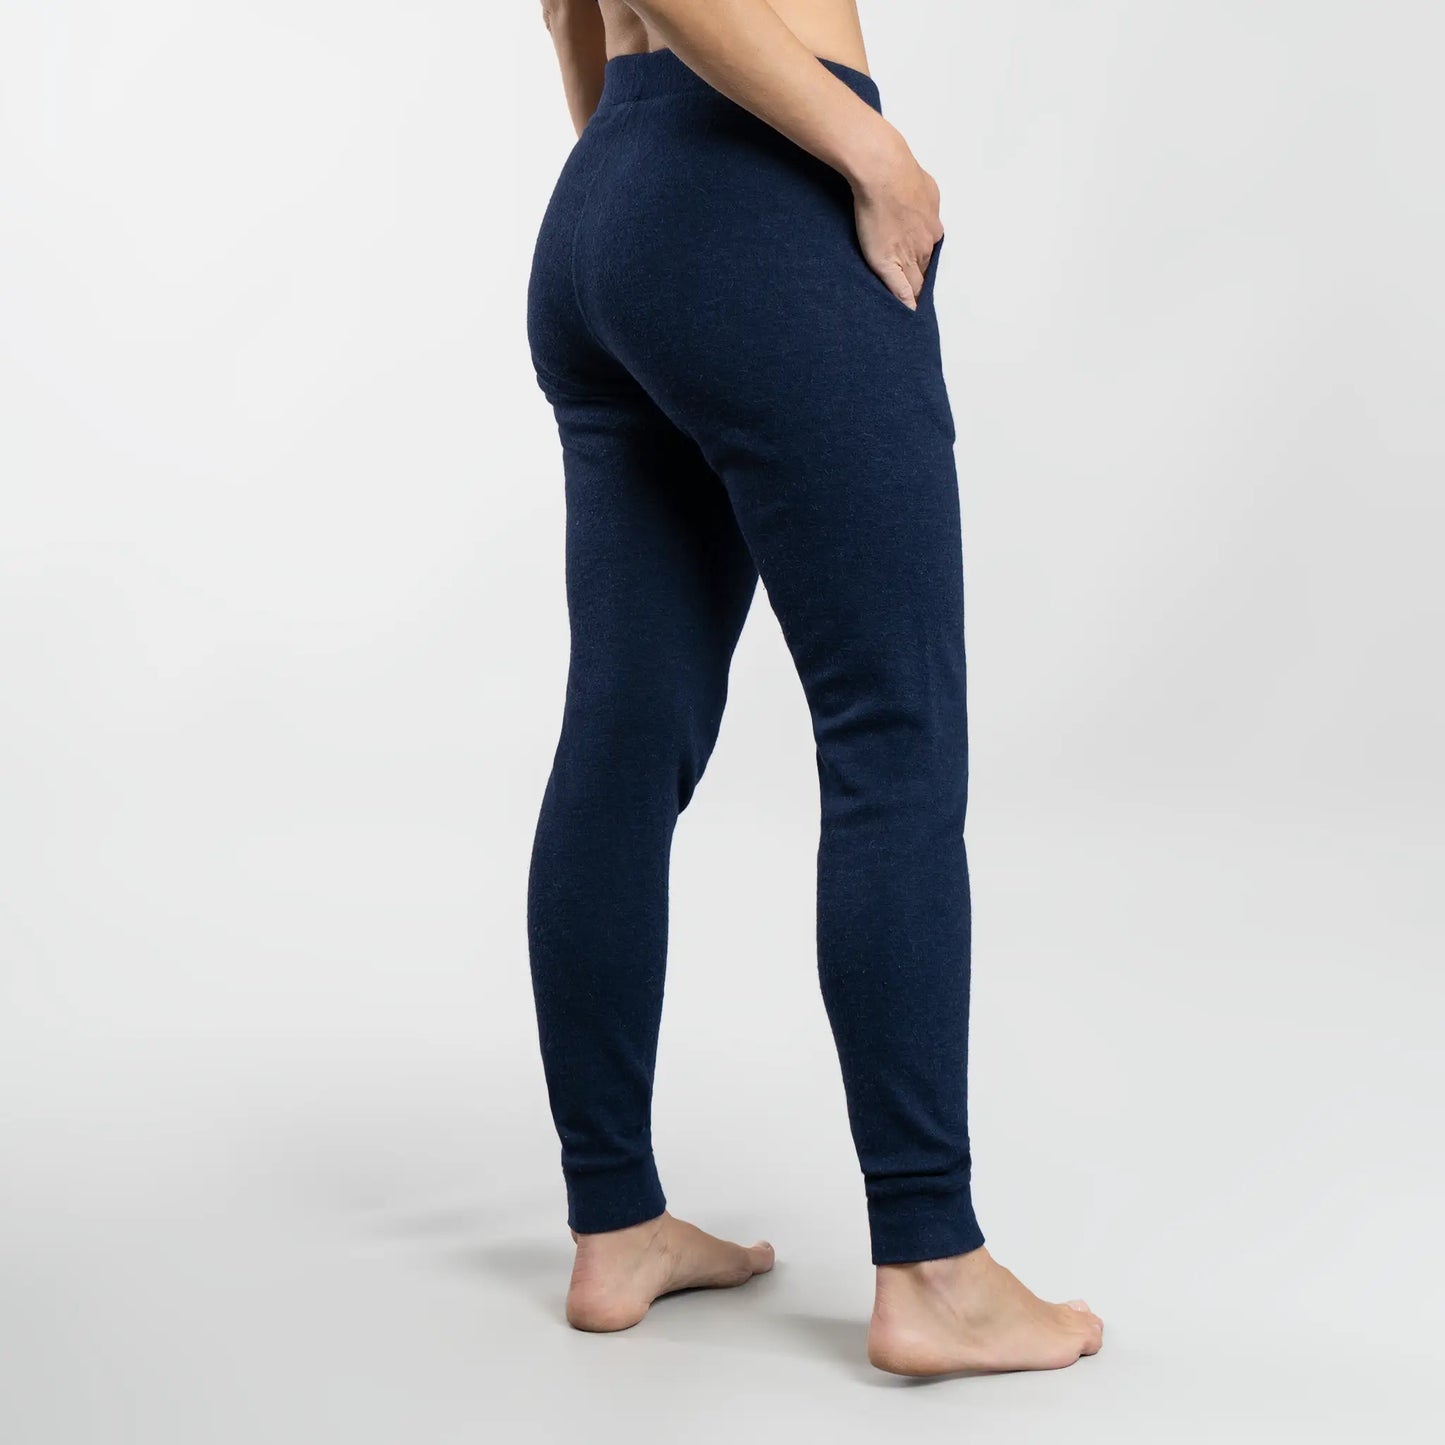 womens comfortable fit joggers lightweight color navy blue